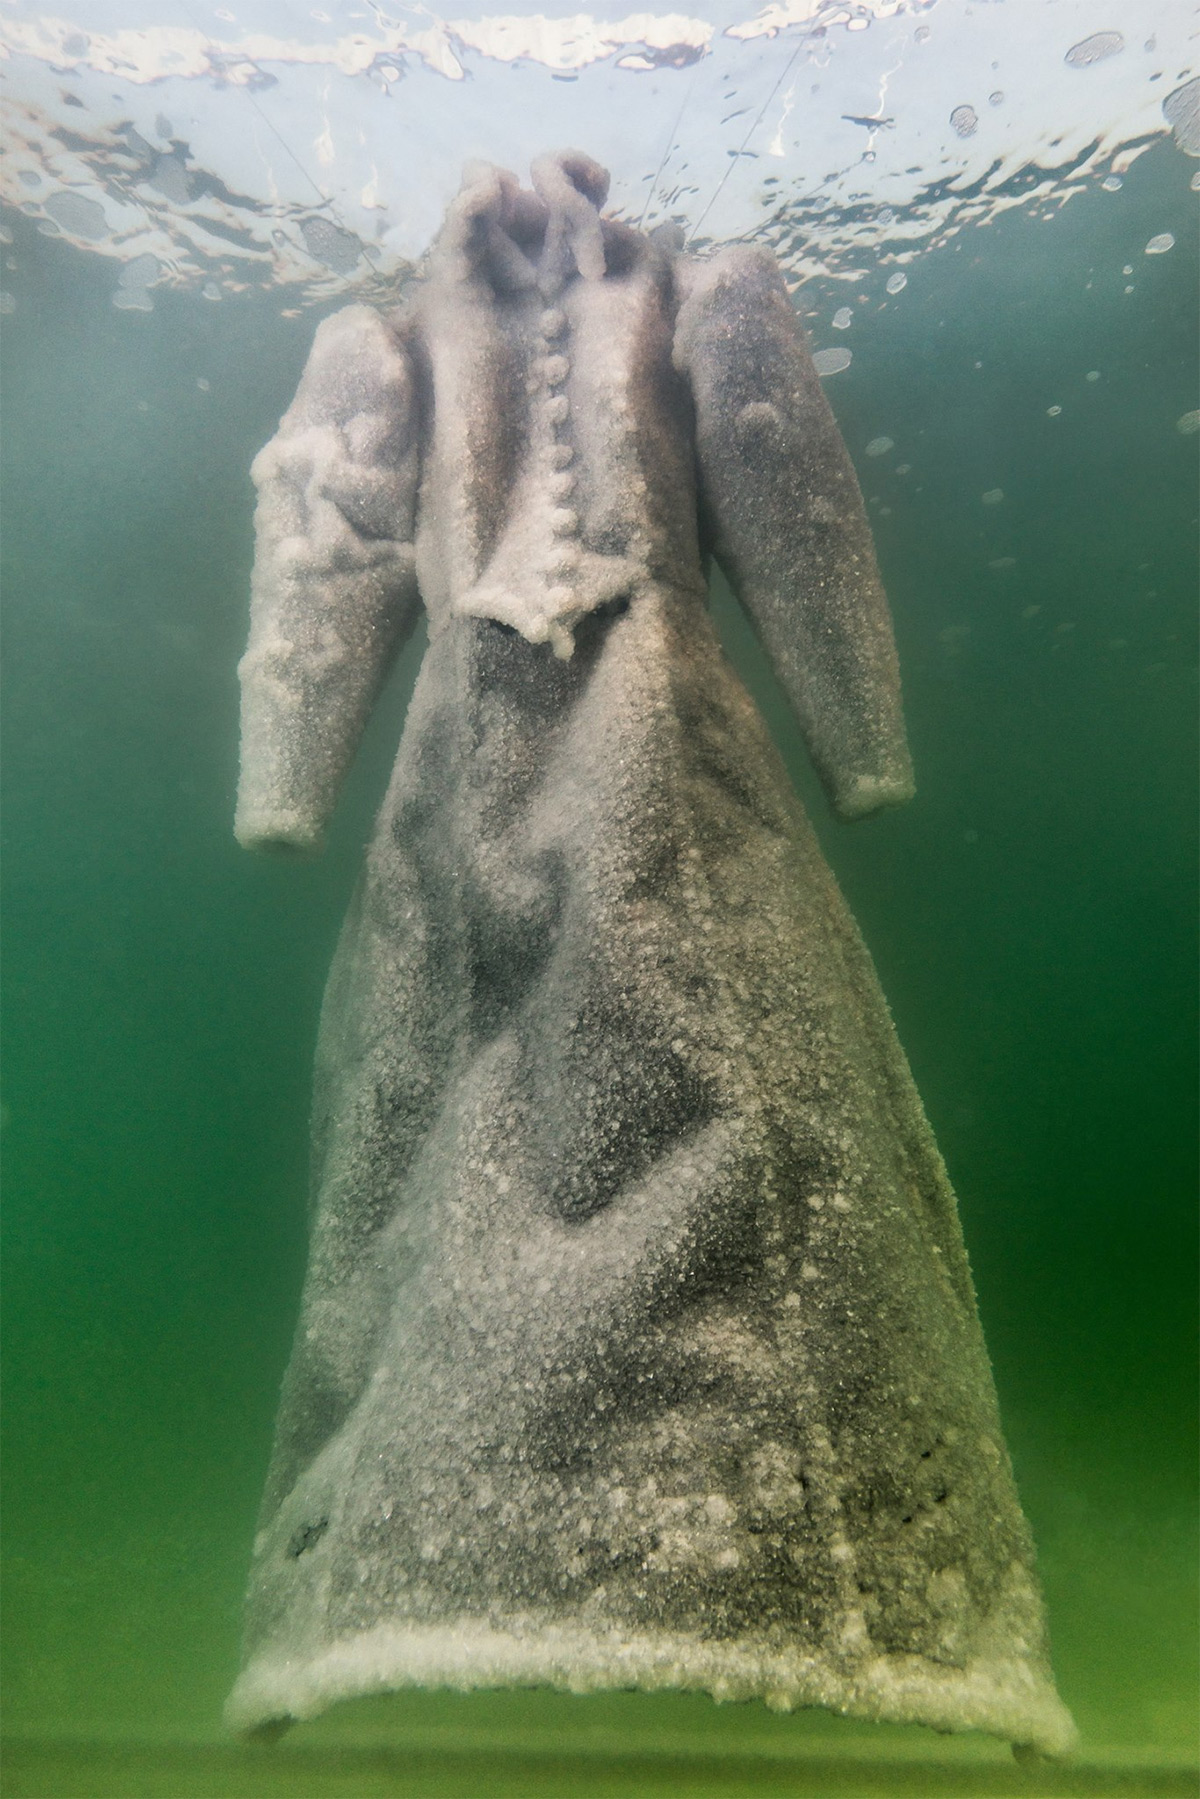 Everyday Objects Submerged In The Dead Sea Transform Into Amazing Salt Sculptures By Sigalit Landau 7